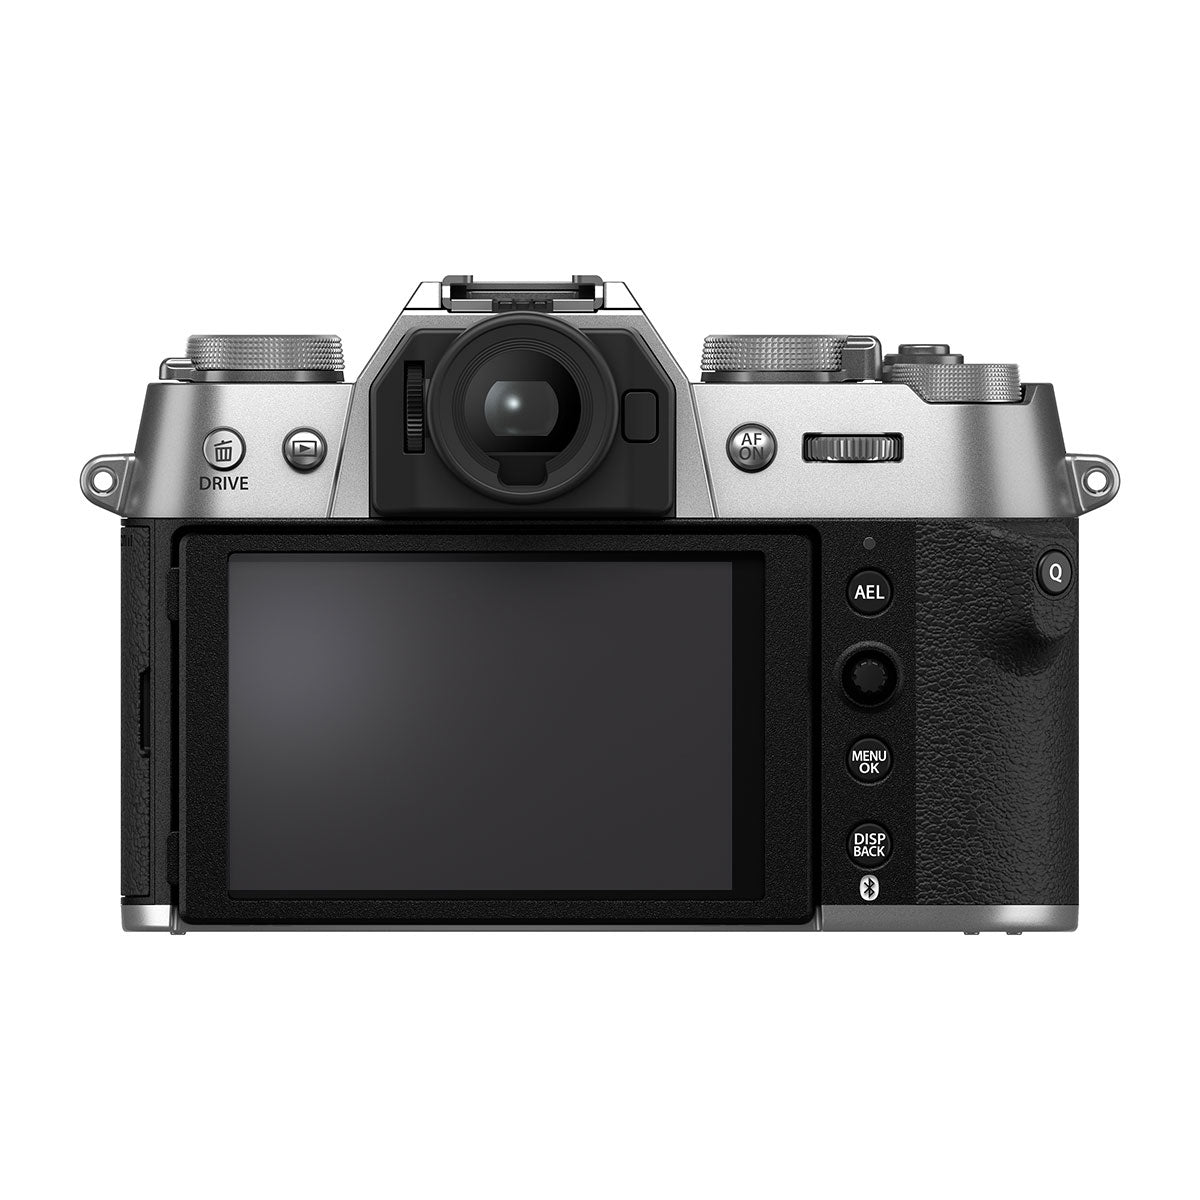 Fujifilm X-T50 Mirrorless Camera with 16-50mm Lens (Silver)